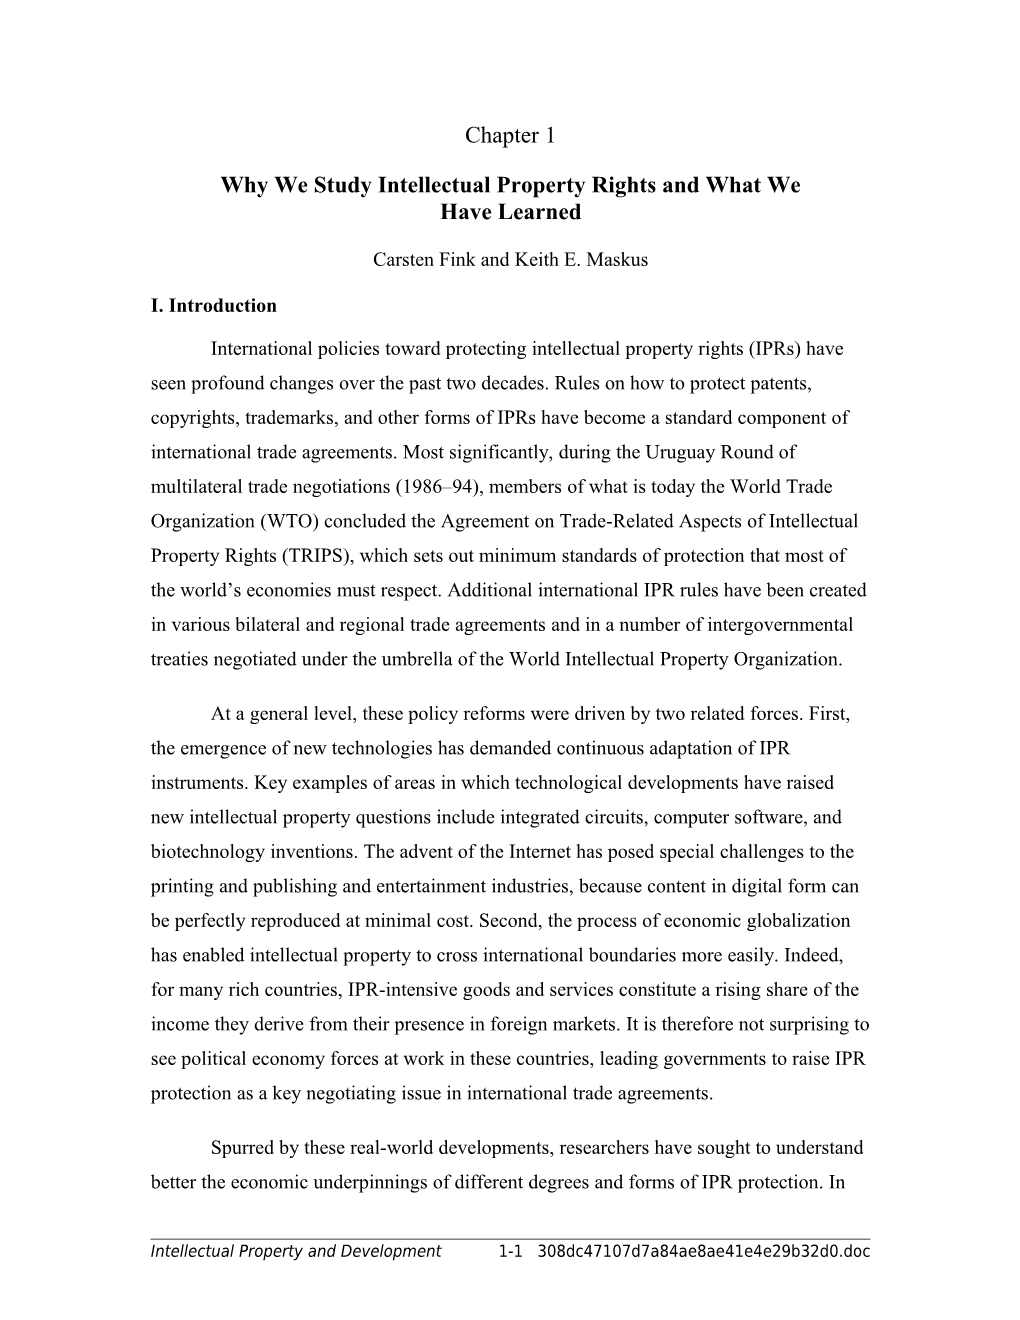 Why We Study Intellectual Property Rights and What We Have Learned